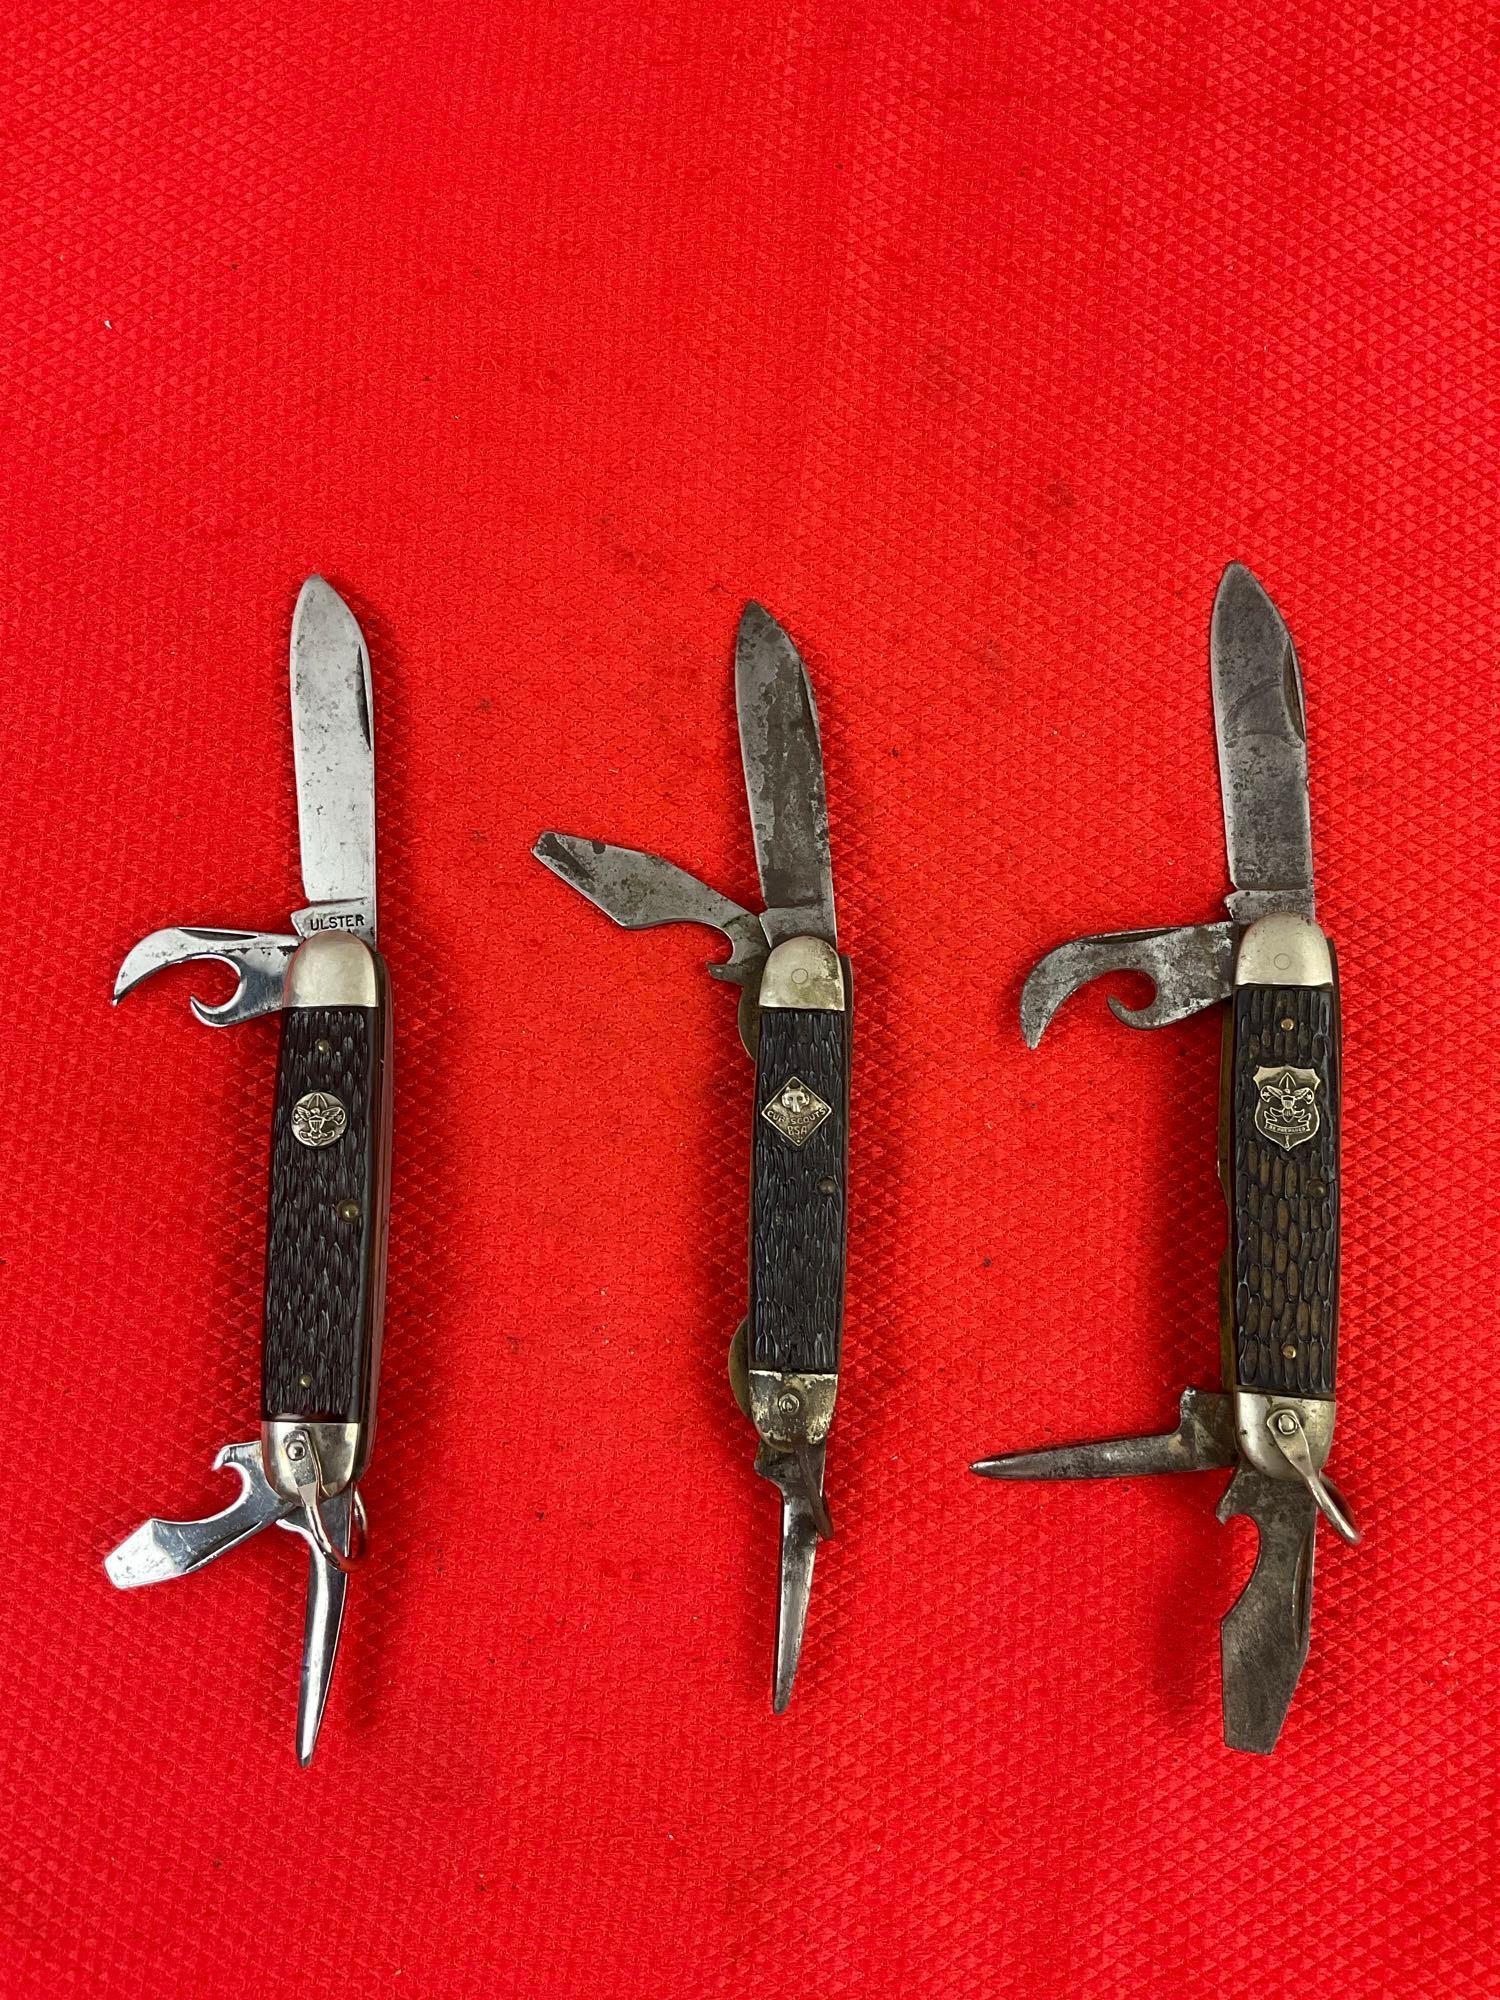 3 pcs Vintage Steel Folding Blade Utility Boy Scout Knives, 2x Imperial Prov. & 1 Ulster. As Is. ...